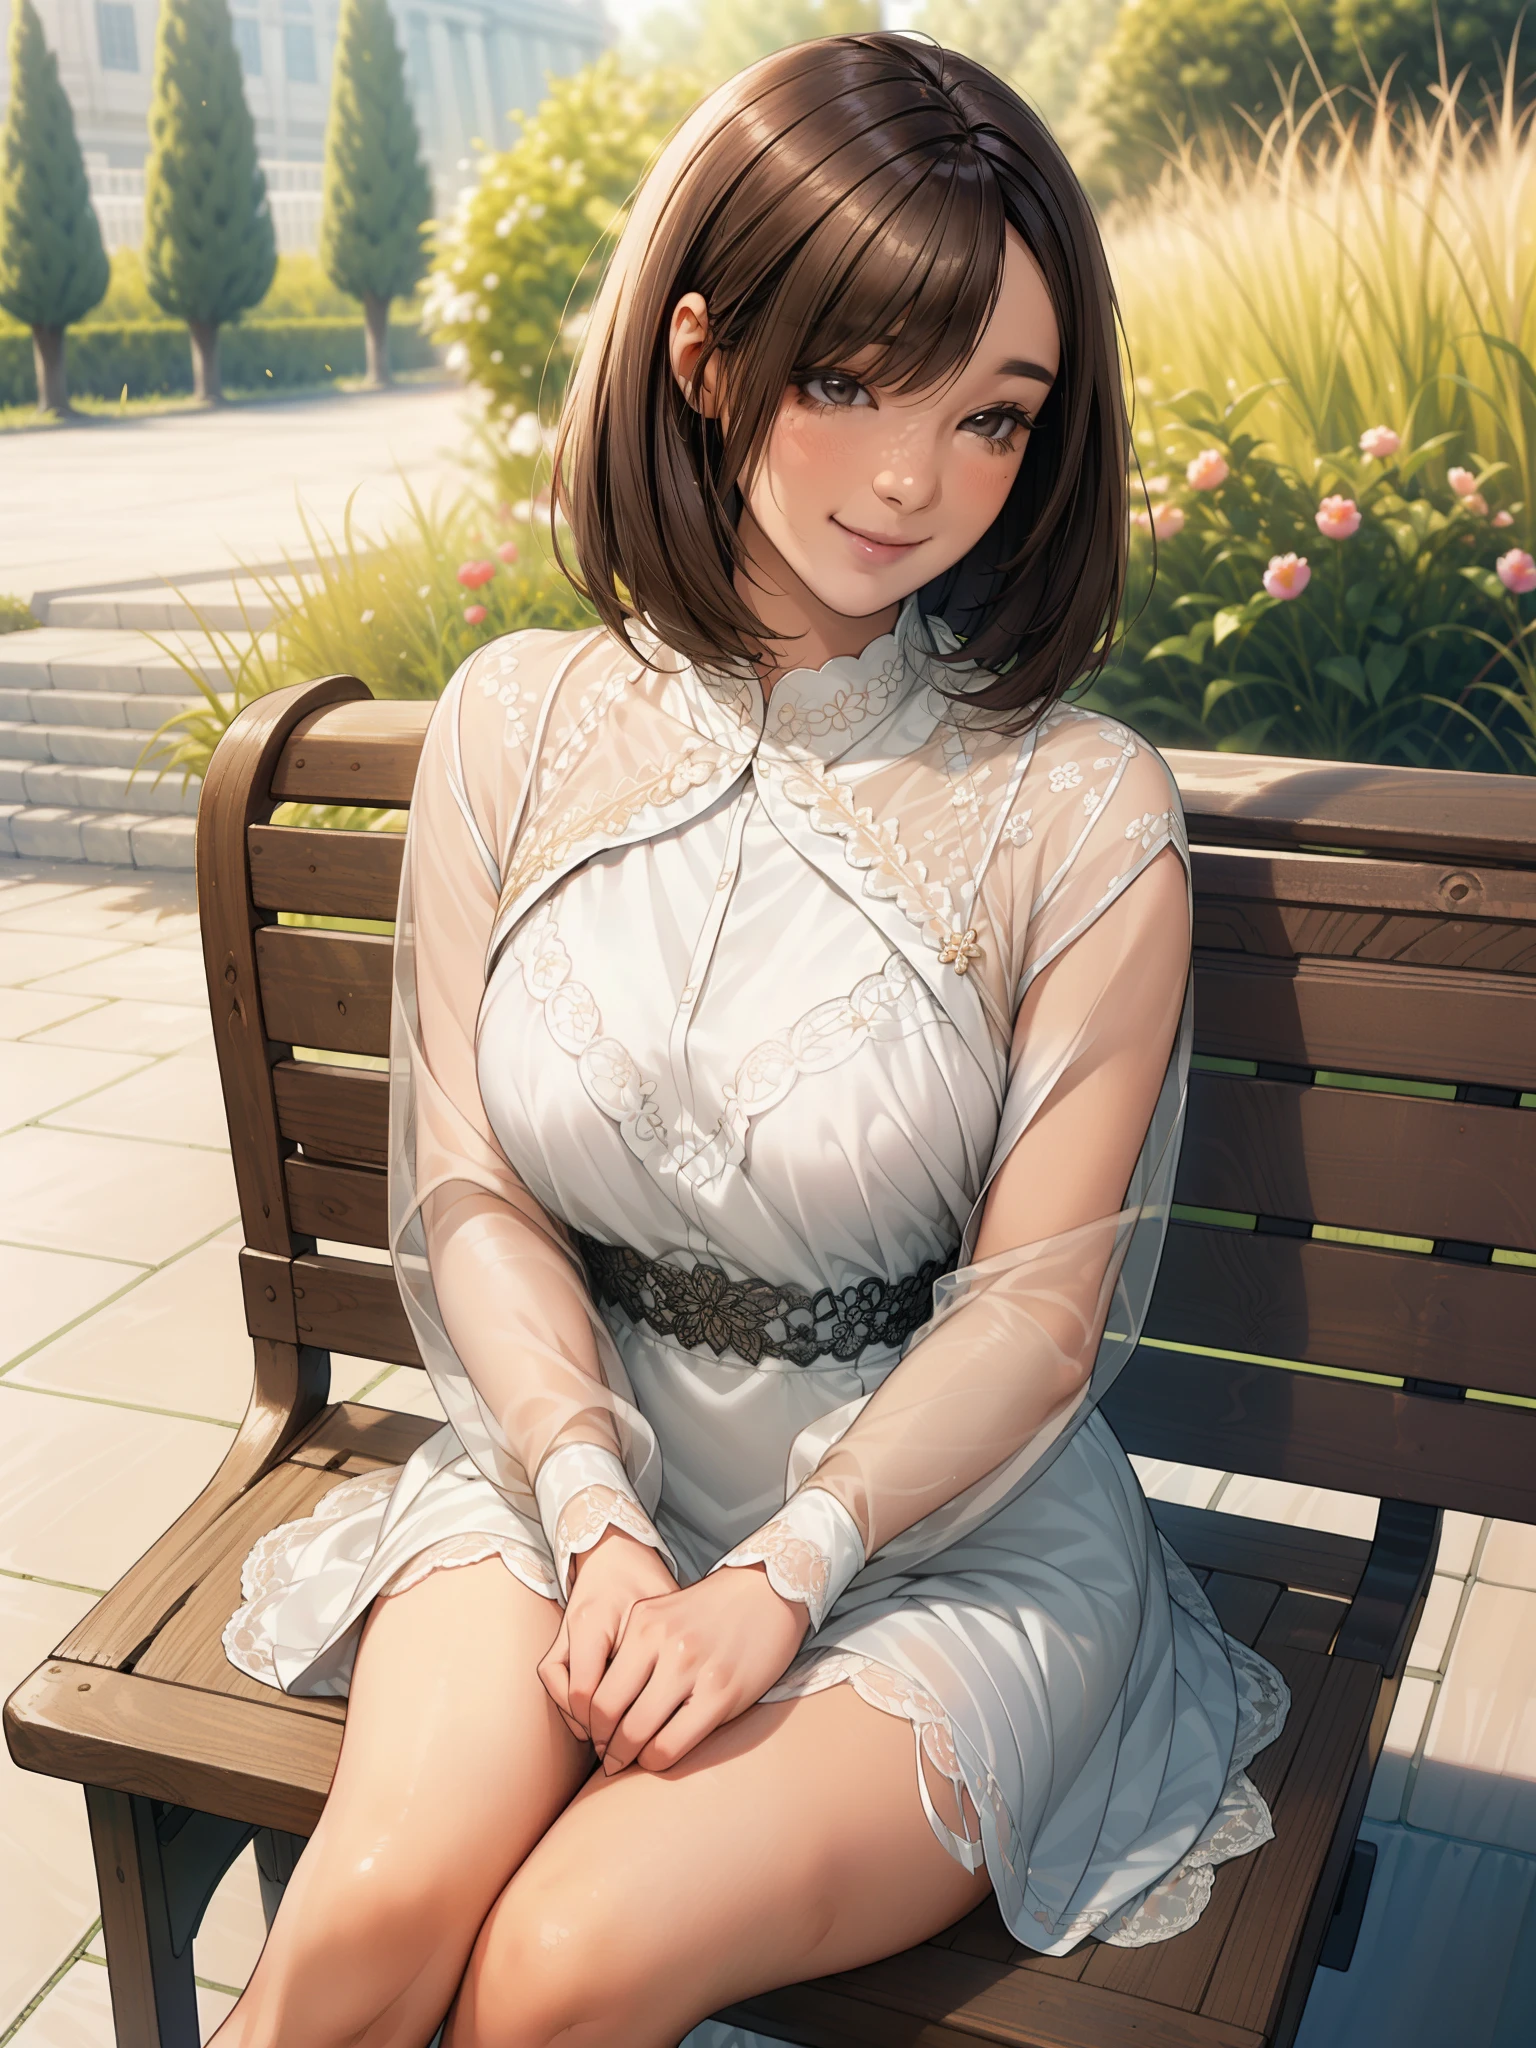 sunny day, Elegant photo of a girl in a blazer dress, (Puffy eyes:1.05), (White lace shirt), Platinum brown hair, (Angled Bob:1.4), Flat bangs, (Flowing hair), smile, Happy, happiness, Skin with attention to detail, Skin pores, A beautiful innocent symmetrical face, Long eyelashes, Black eyeliner, Light gold eyeshadow,(Sit on a bench), Crossed_feet, Emotional, Wind, garden, wood, Grass, masterpiece, highest quality, Realistic,